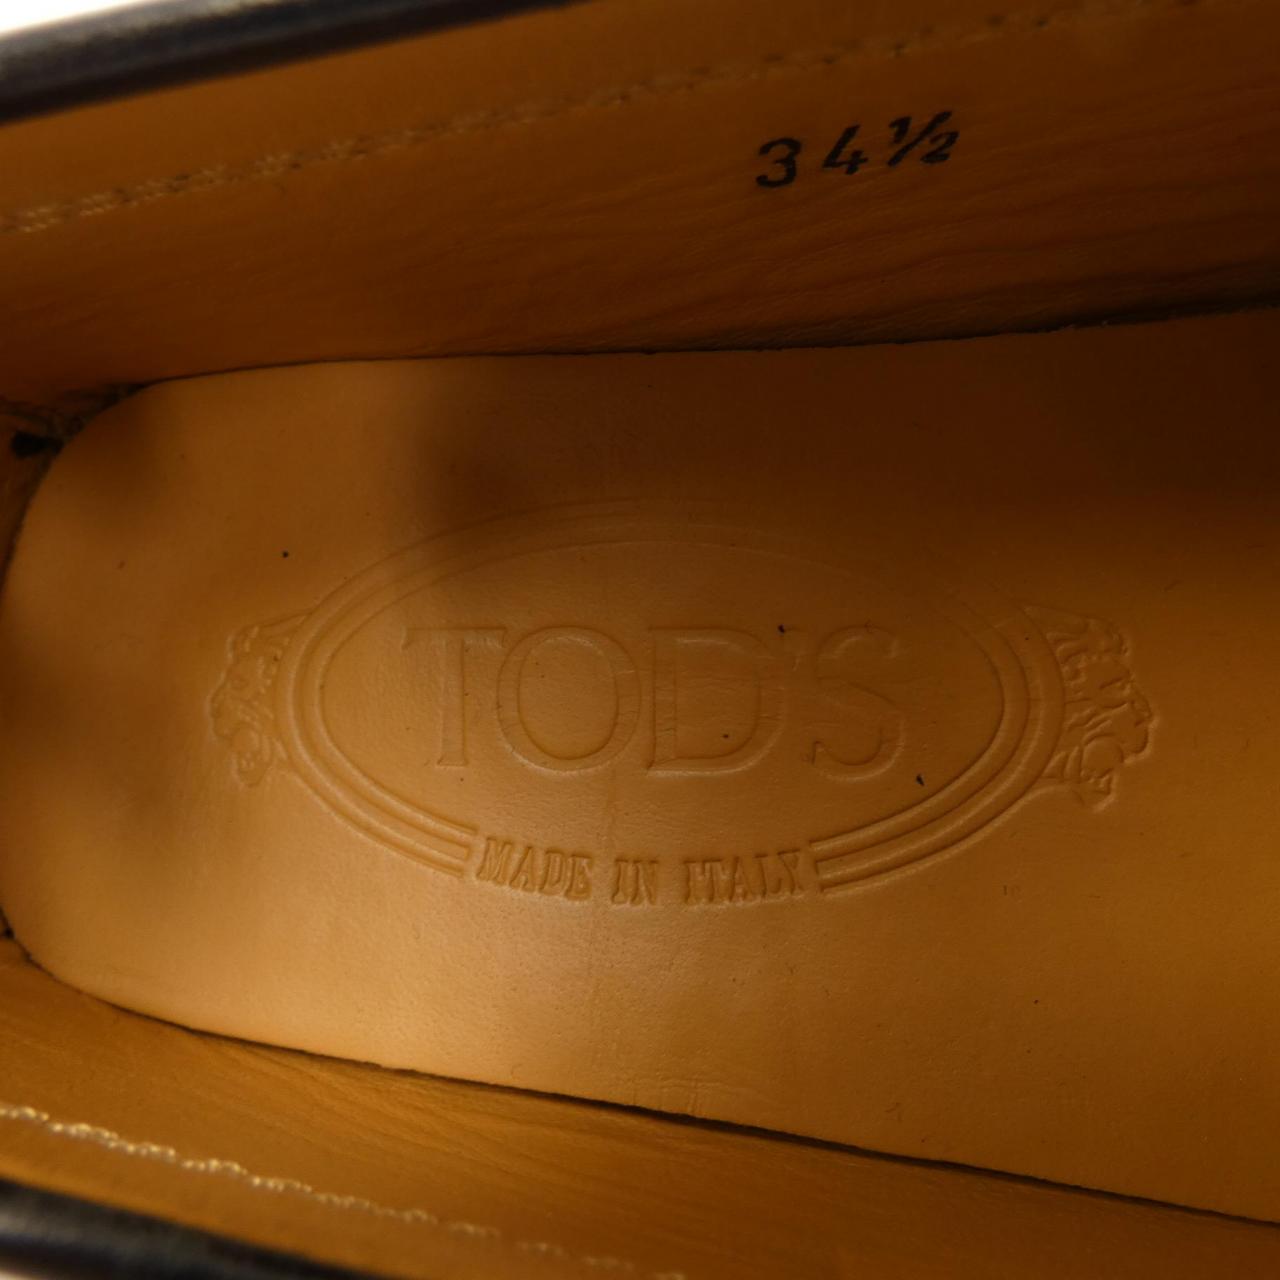 TOD'S shoes